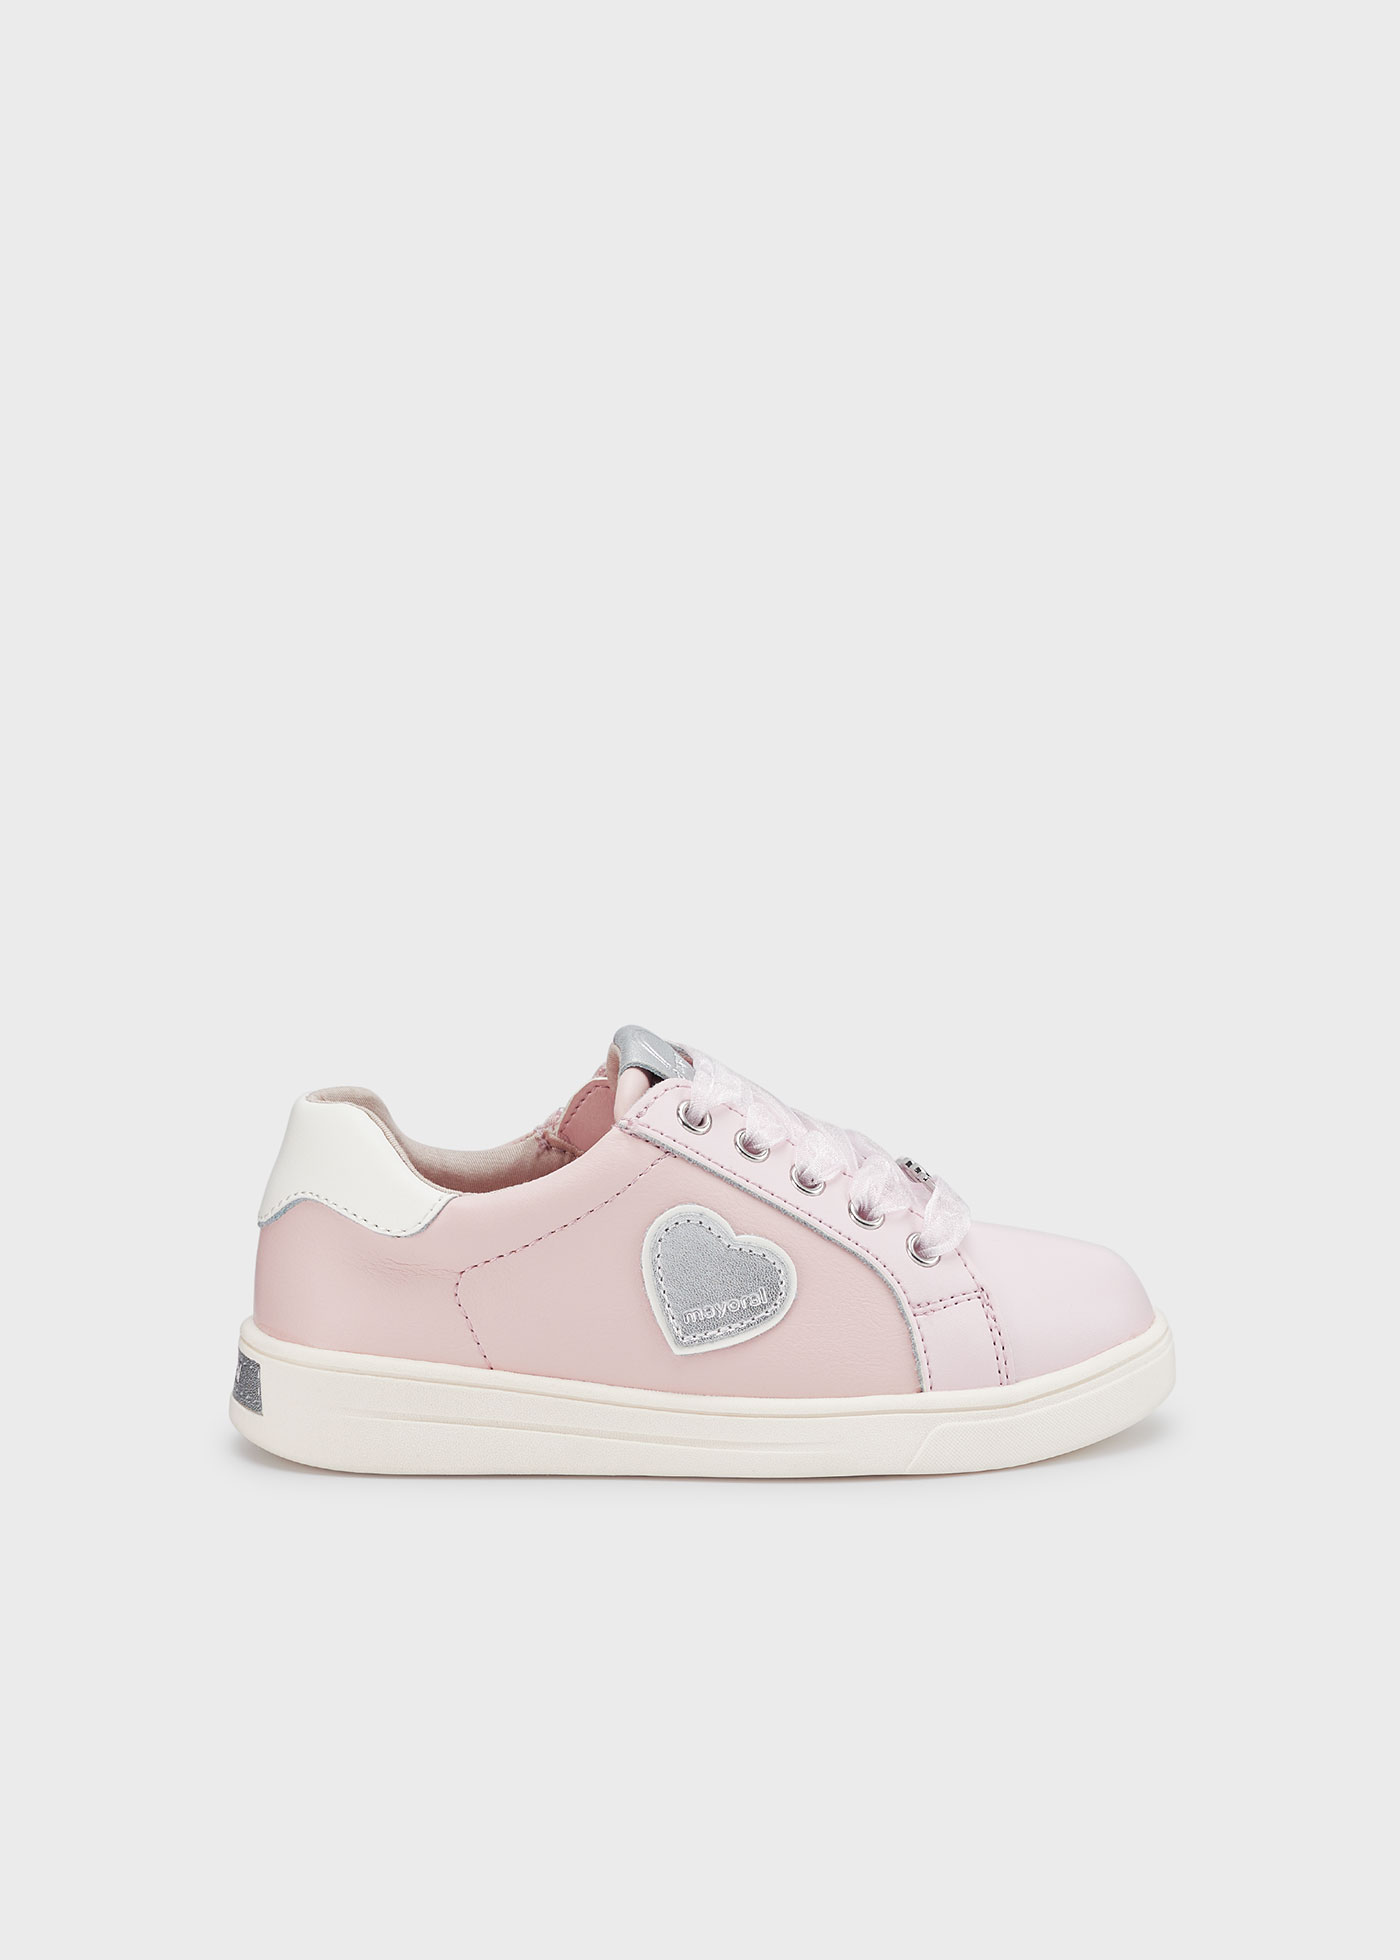 Girls sneakers heart sustainable leather